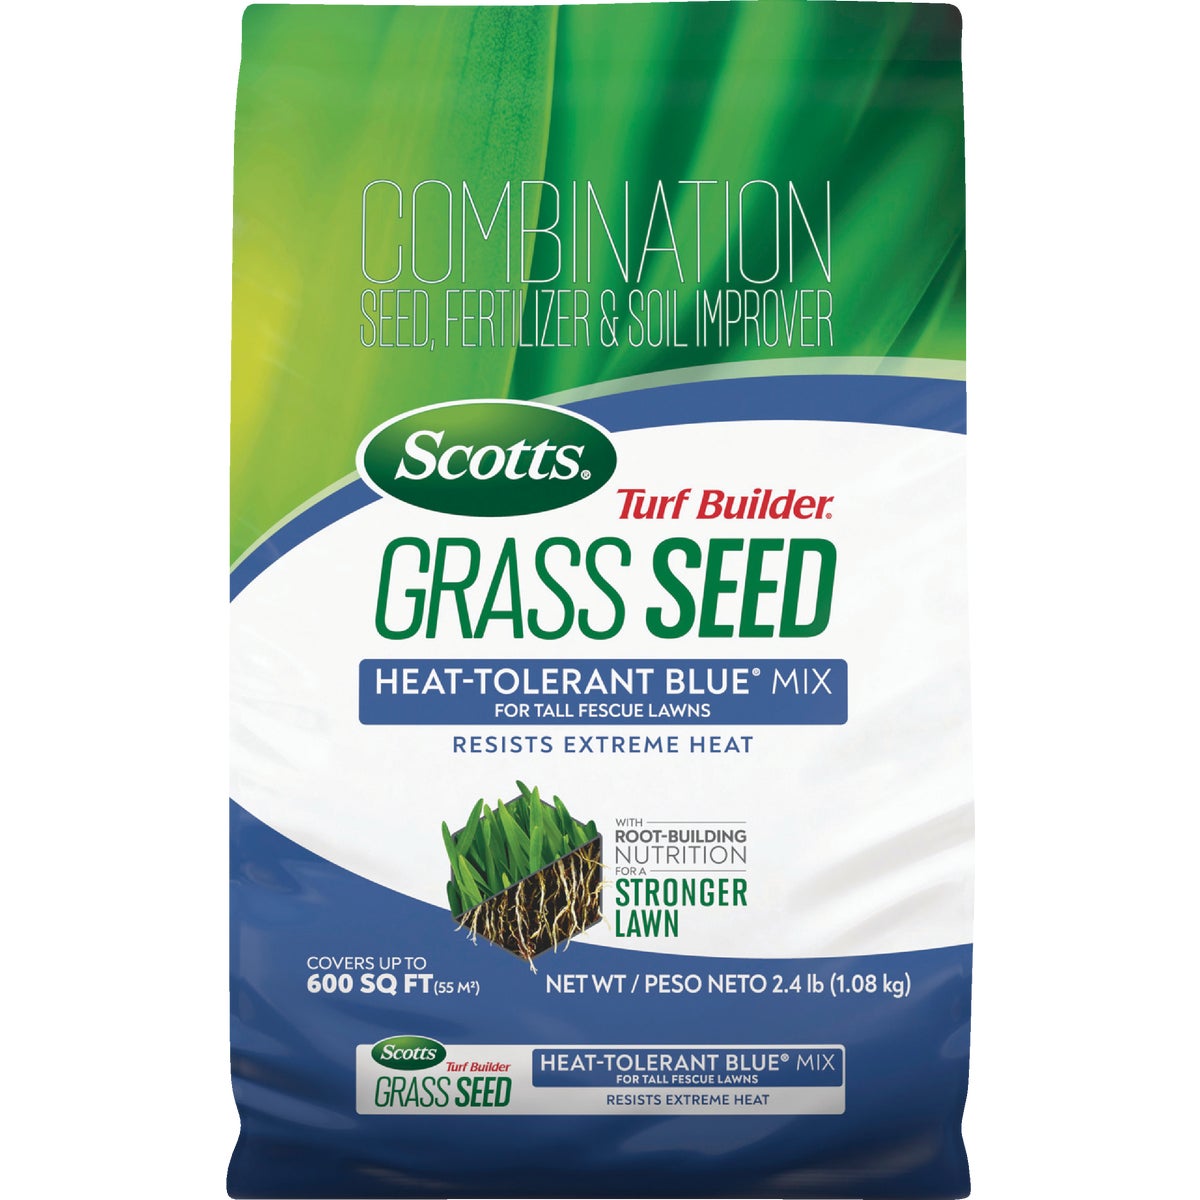 Scotts Turf Builder 2.4 Lb. 200 Sq. Ft. Heat-Tolerant Blue Mix for Tall Fescue Lawns Grass Seed